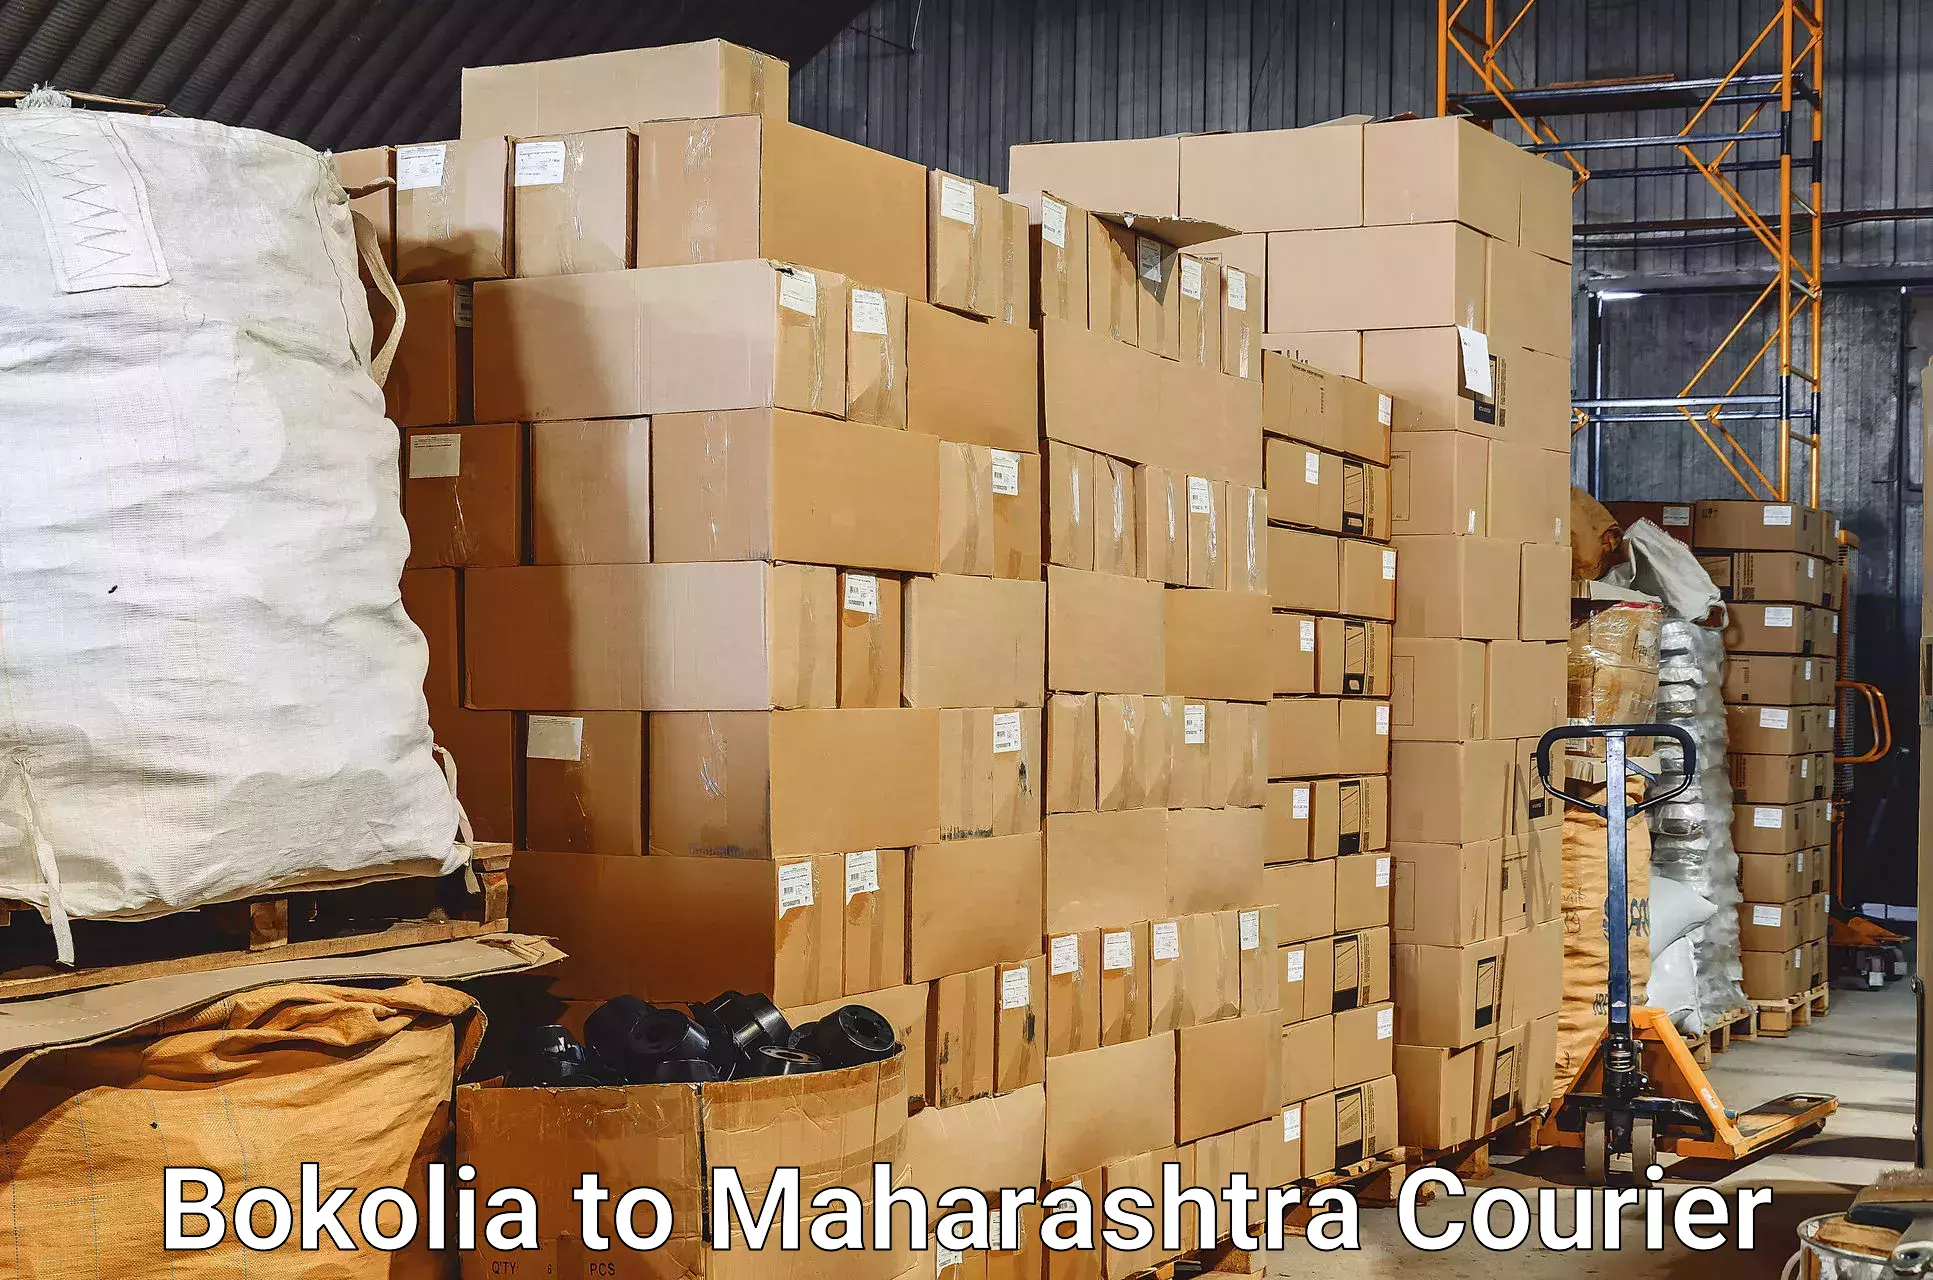 Baggage delivery scheduling Bokolia to Lonar